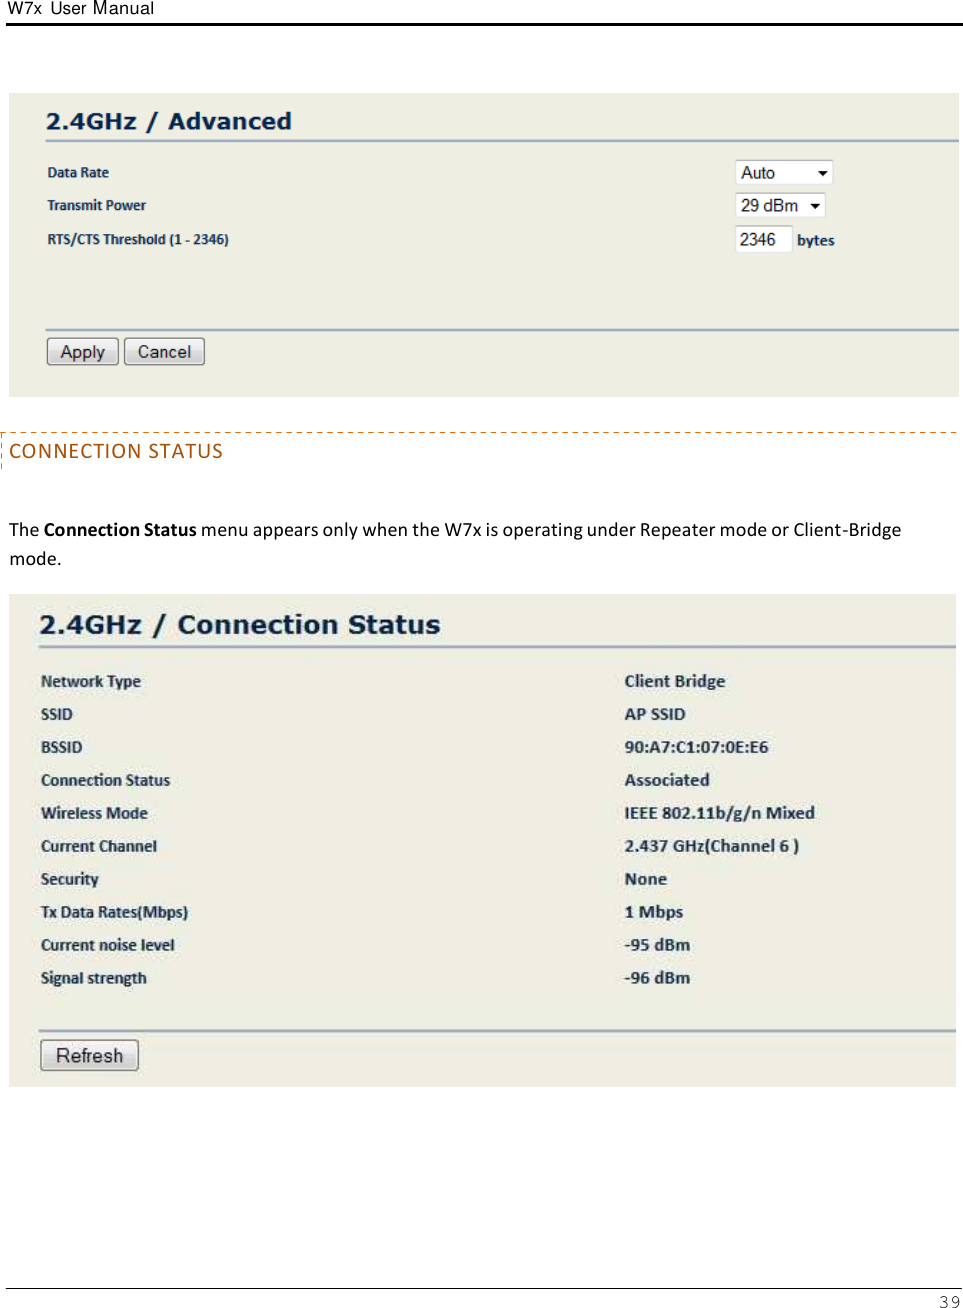 W7x  User Manual 39         CONNECTION STATUS    The Connection Status menu appears only when the W7x is operating under Repeater mode or Client-Bridge mode.   